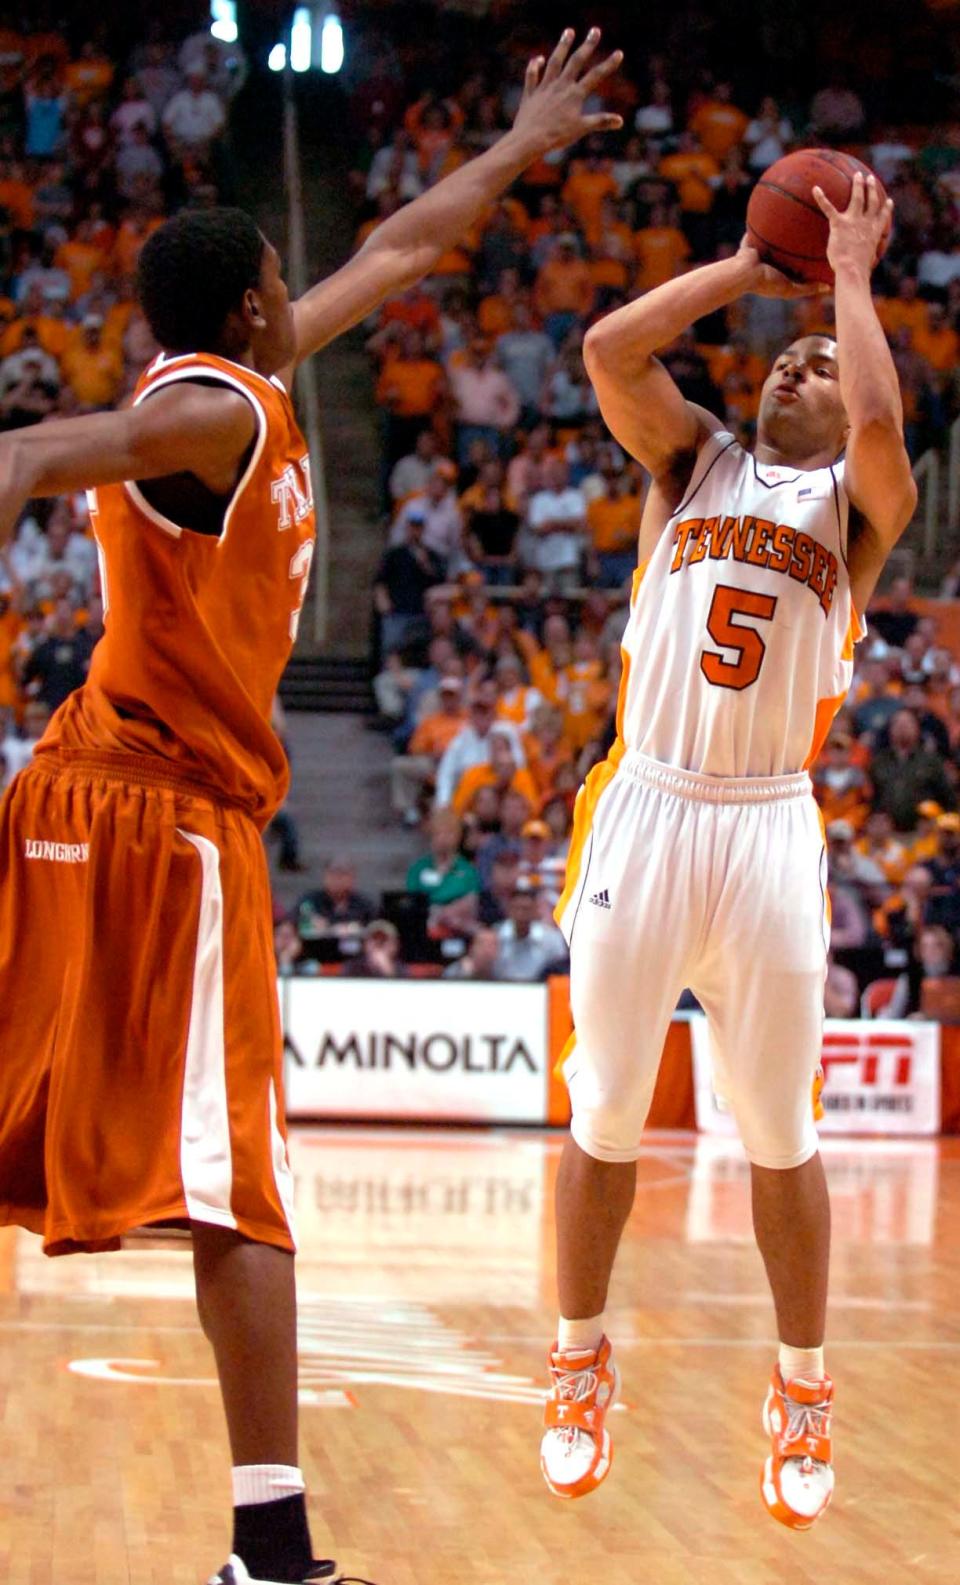 UT's Chris Lofton shoots for three in overtime as Texas defender Kevin Durant tries to block his view Dec. 23, 2006. Lofton scored a career high 35 points to lead the Volunteers.